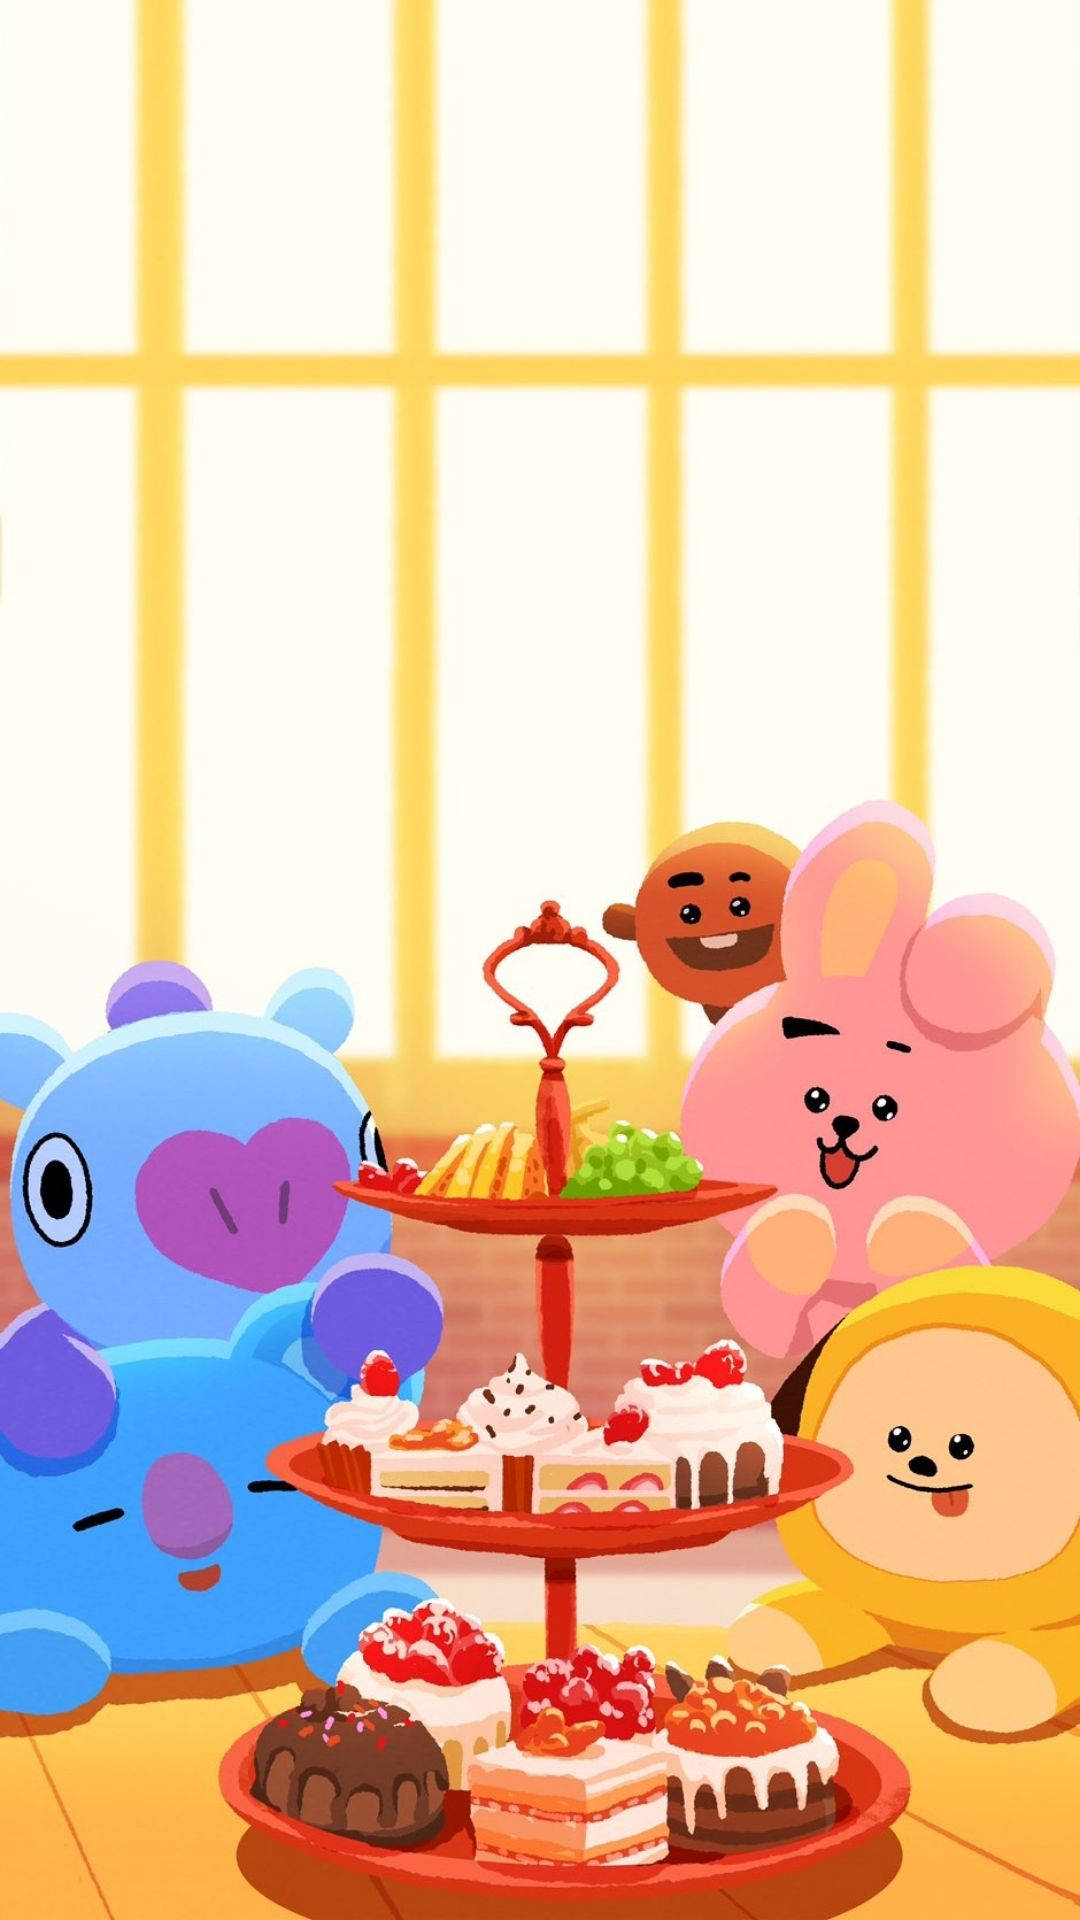 Bt21 Craving Sweets Background